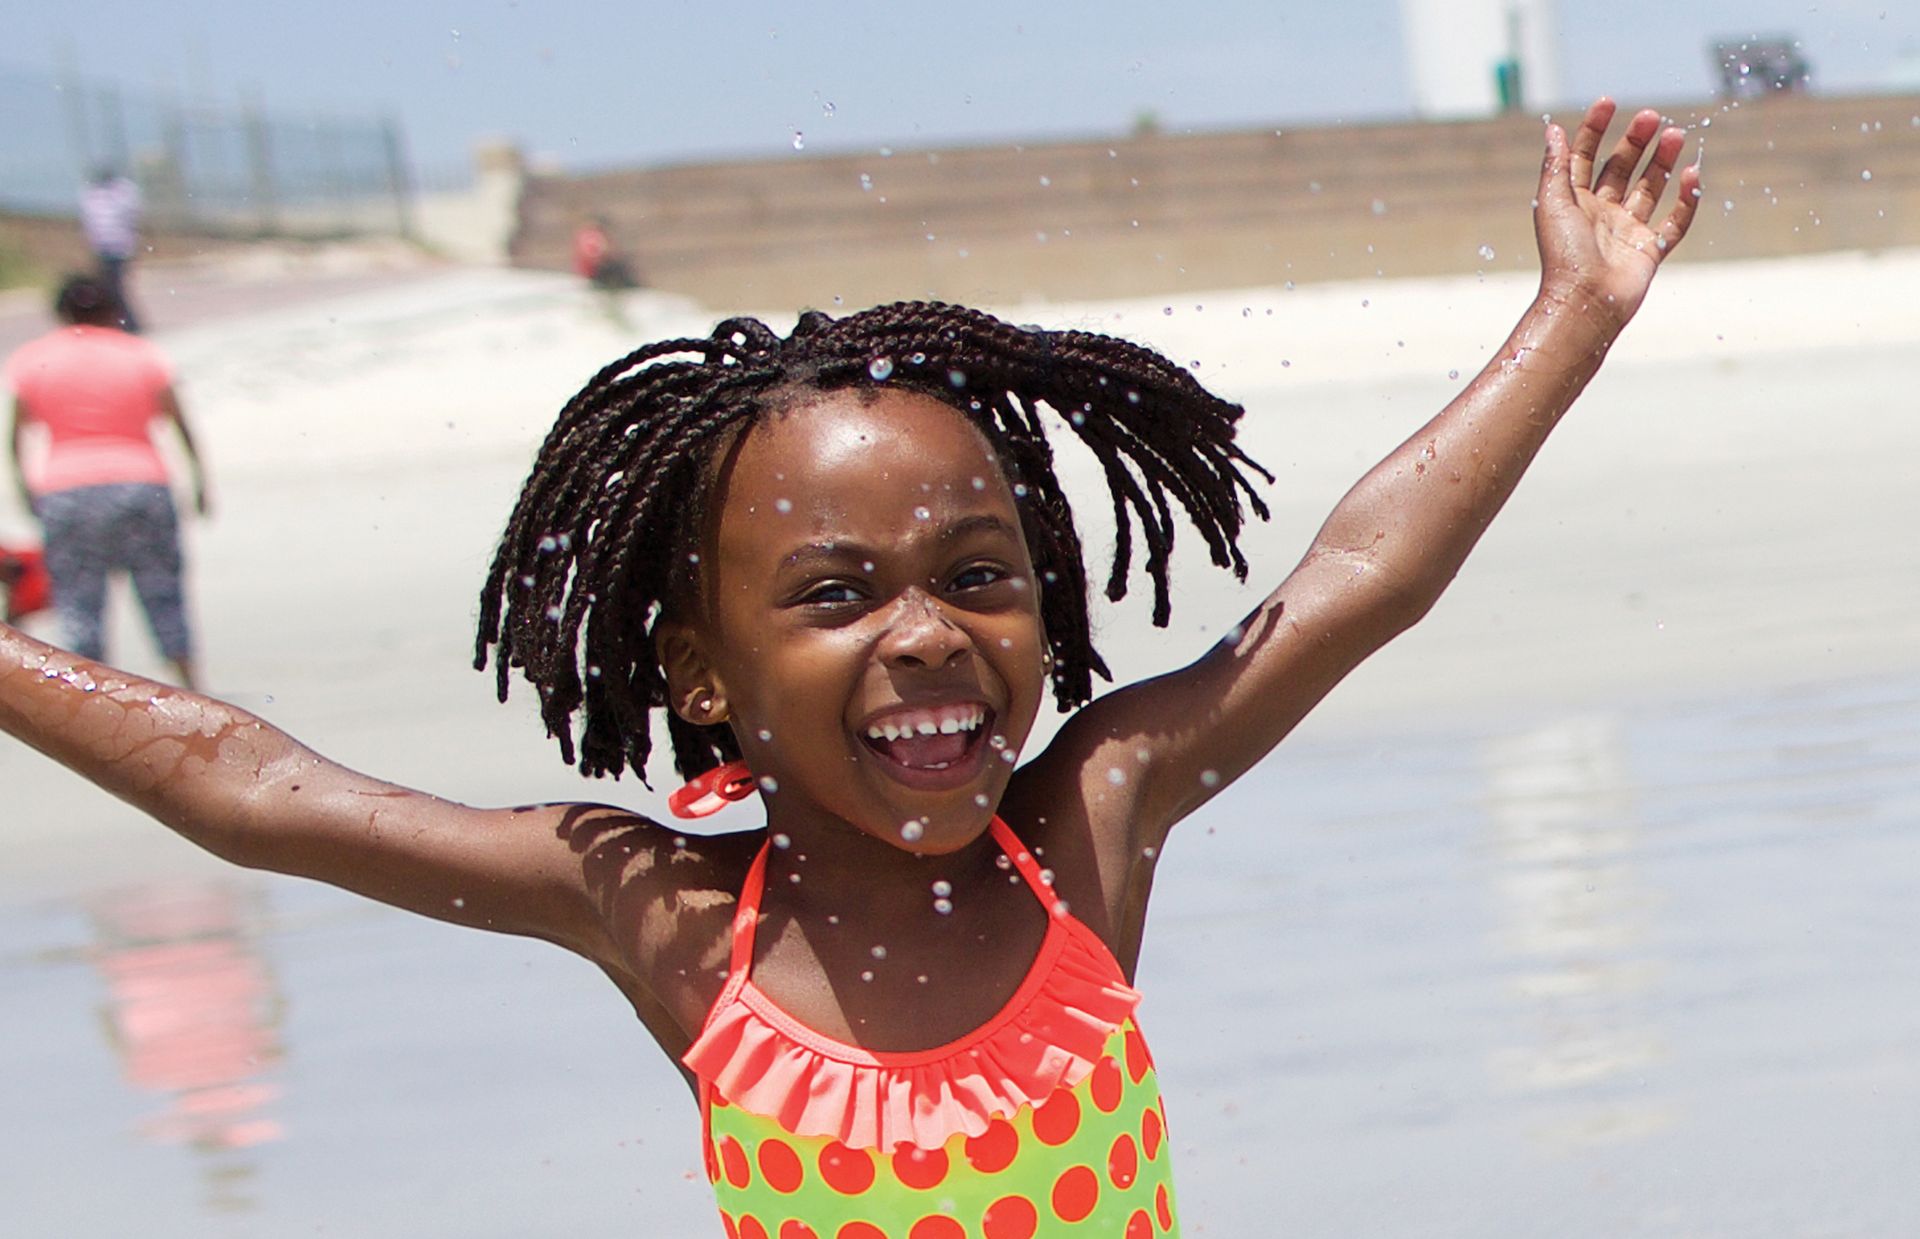 The beach is a great relief from the heat. Just ask six-year-old Tariro, who loves playing in the water.